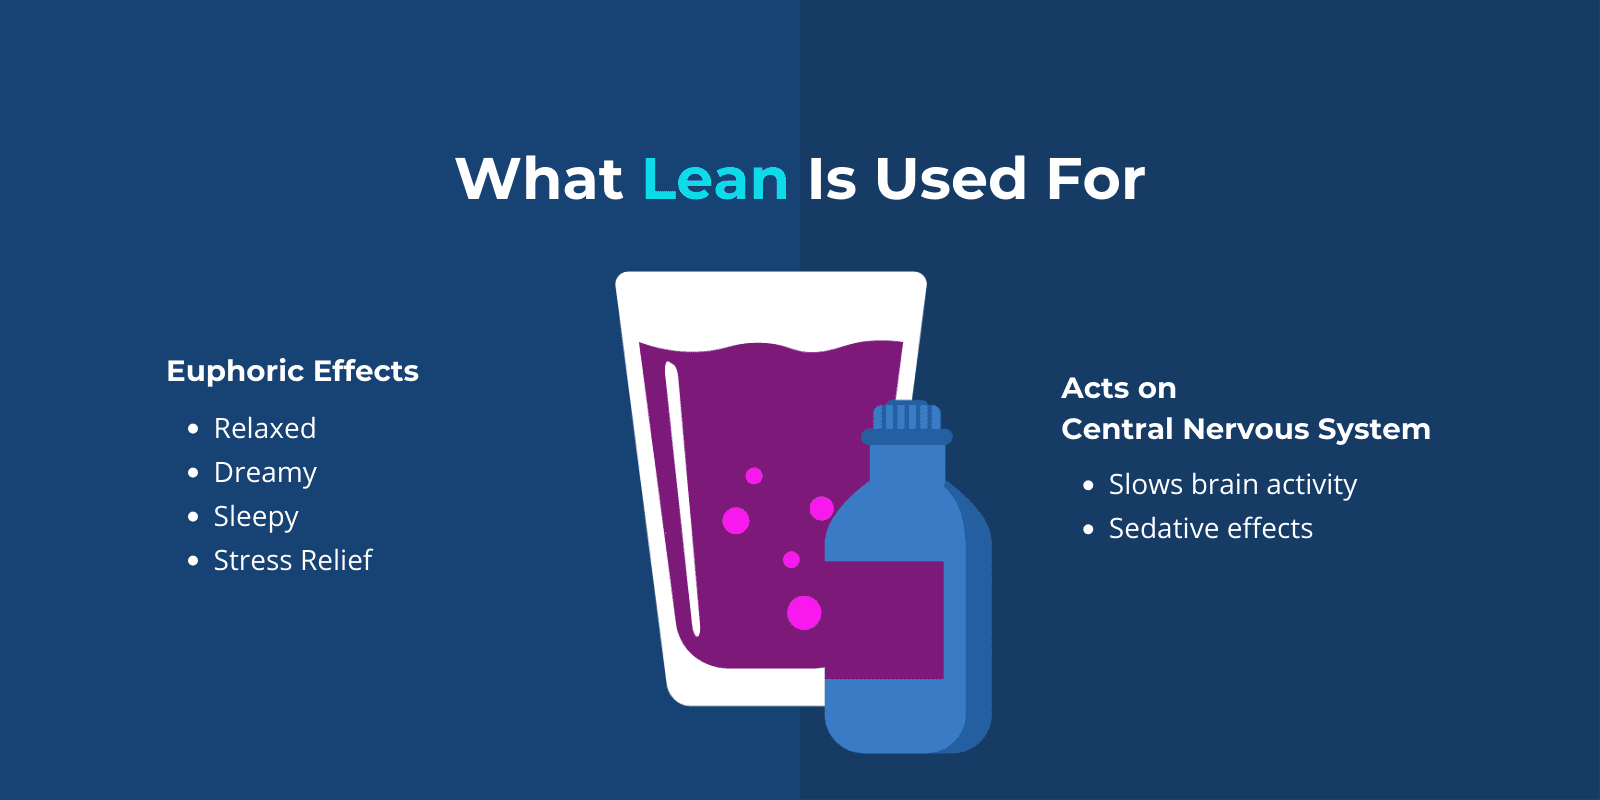 "What Lean Is Used For" title written above lists of Euphoric Effects of Lean and a list of impacts it has on the body next to a digital graphic of lean (purple drank) and cough syrup bottle